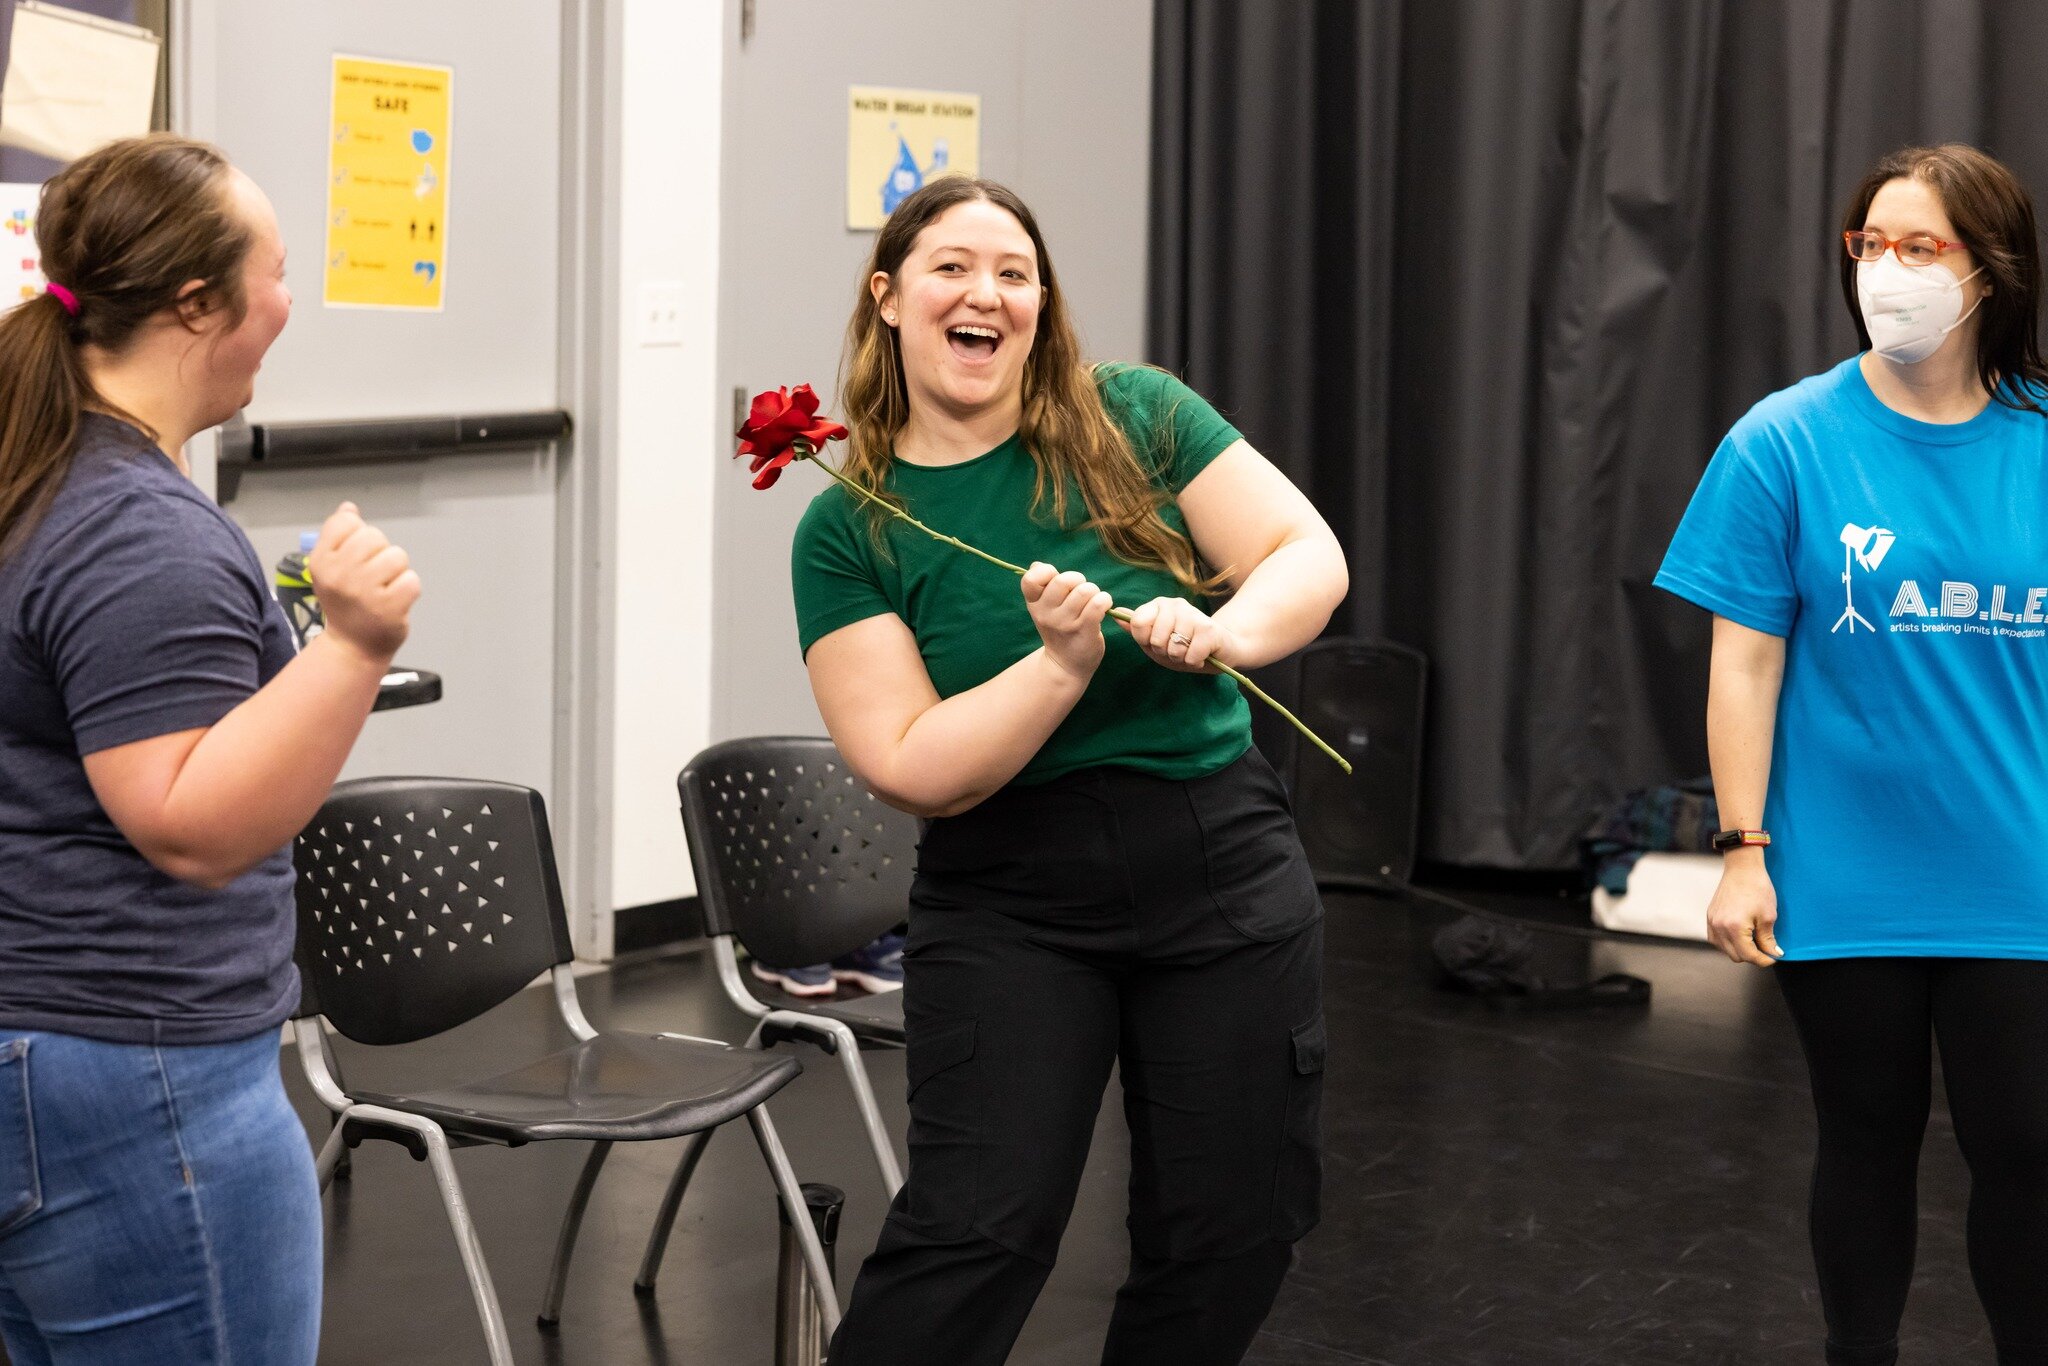 A big #HappyBirthday to our friend and fabulous facilitator Jenna! Jenna has been part of our community since 2017. We're so lucky she continues to carve out time to be with us in rehearsals and share her love of music and vibrant stage presence with